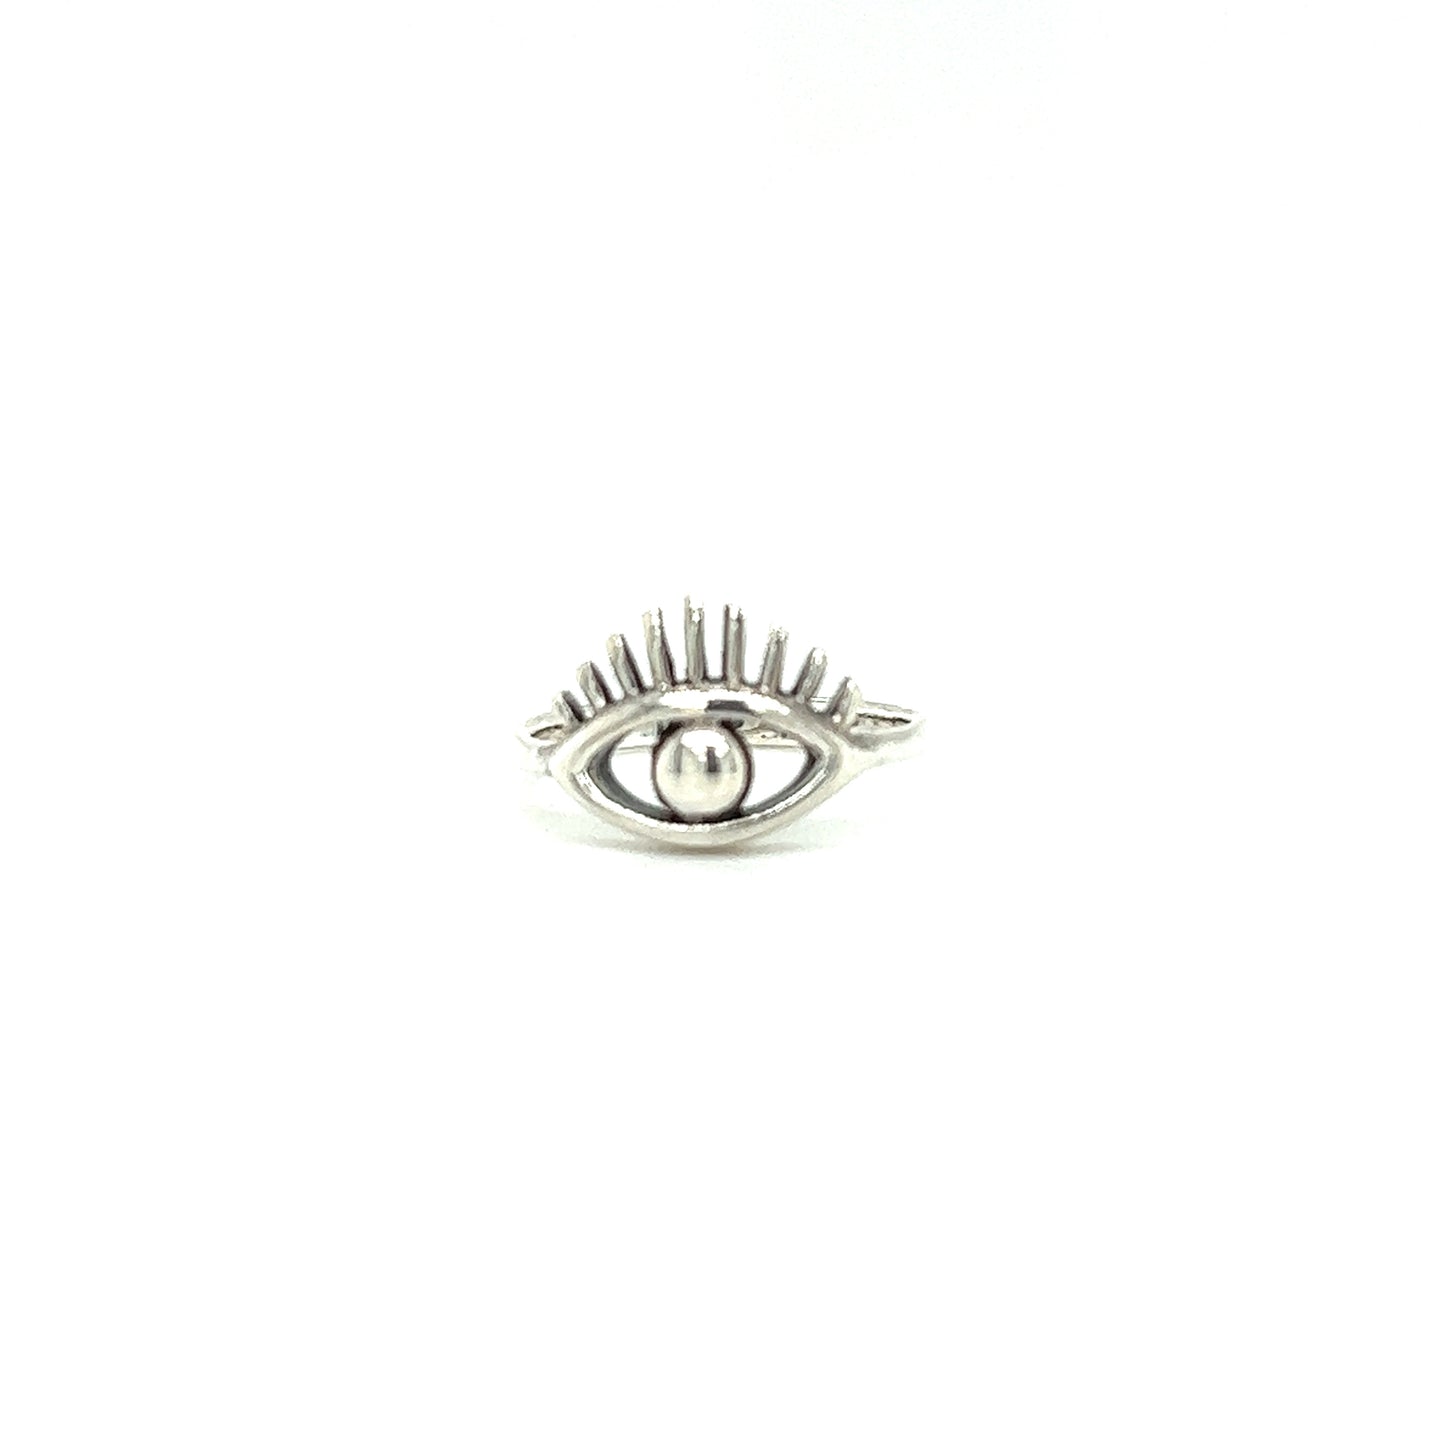 A modern and minimalist Modern Evil Eye Ring on a white background.